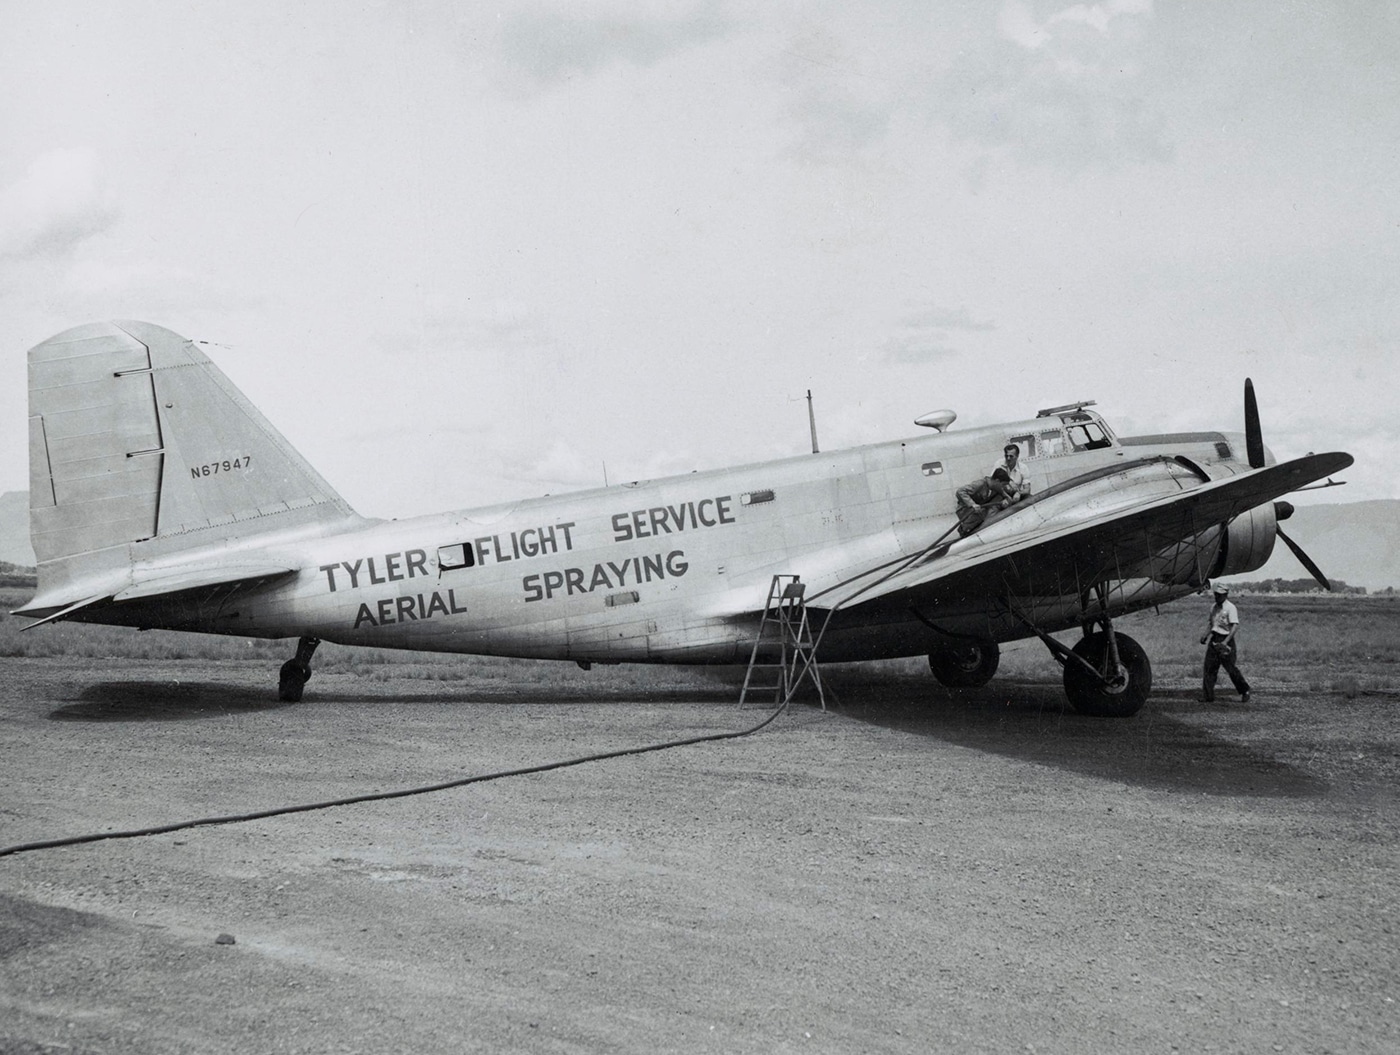 In this photograph, we see a post-WWII B-18 in civilian use. These planes were often used for cargo or crop spraying aircraft by commercial operators  — a much different position that its role in 1943. This one sprayed DDT. Dichlorodiphenyltrichloroethane, commonly known as DDT, is a colorless, tasteless, and almost odorless crystalline chemical compound, an organochloride. Originally developed as an insecticide, it became infamous for its environmental impacts. DDT was first synthesized in 1874 by the Austrian chemist Othmar Zeidler. DDT's insecticidal action was discovered by the Swiss chemist Paul Hermann Müller in 1939.